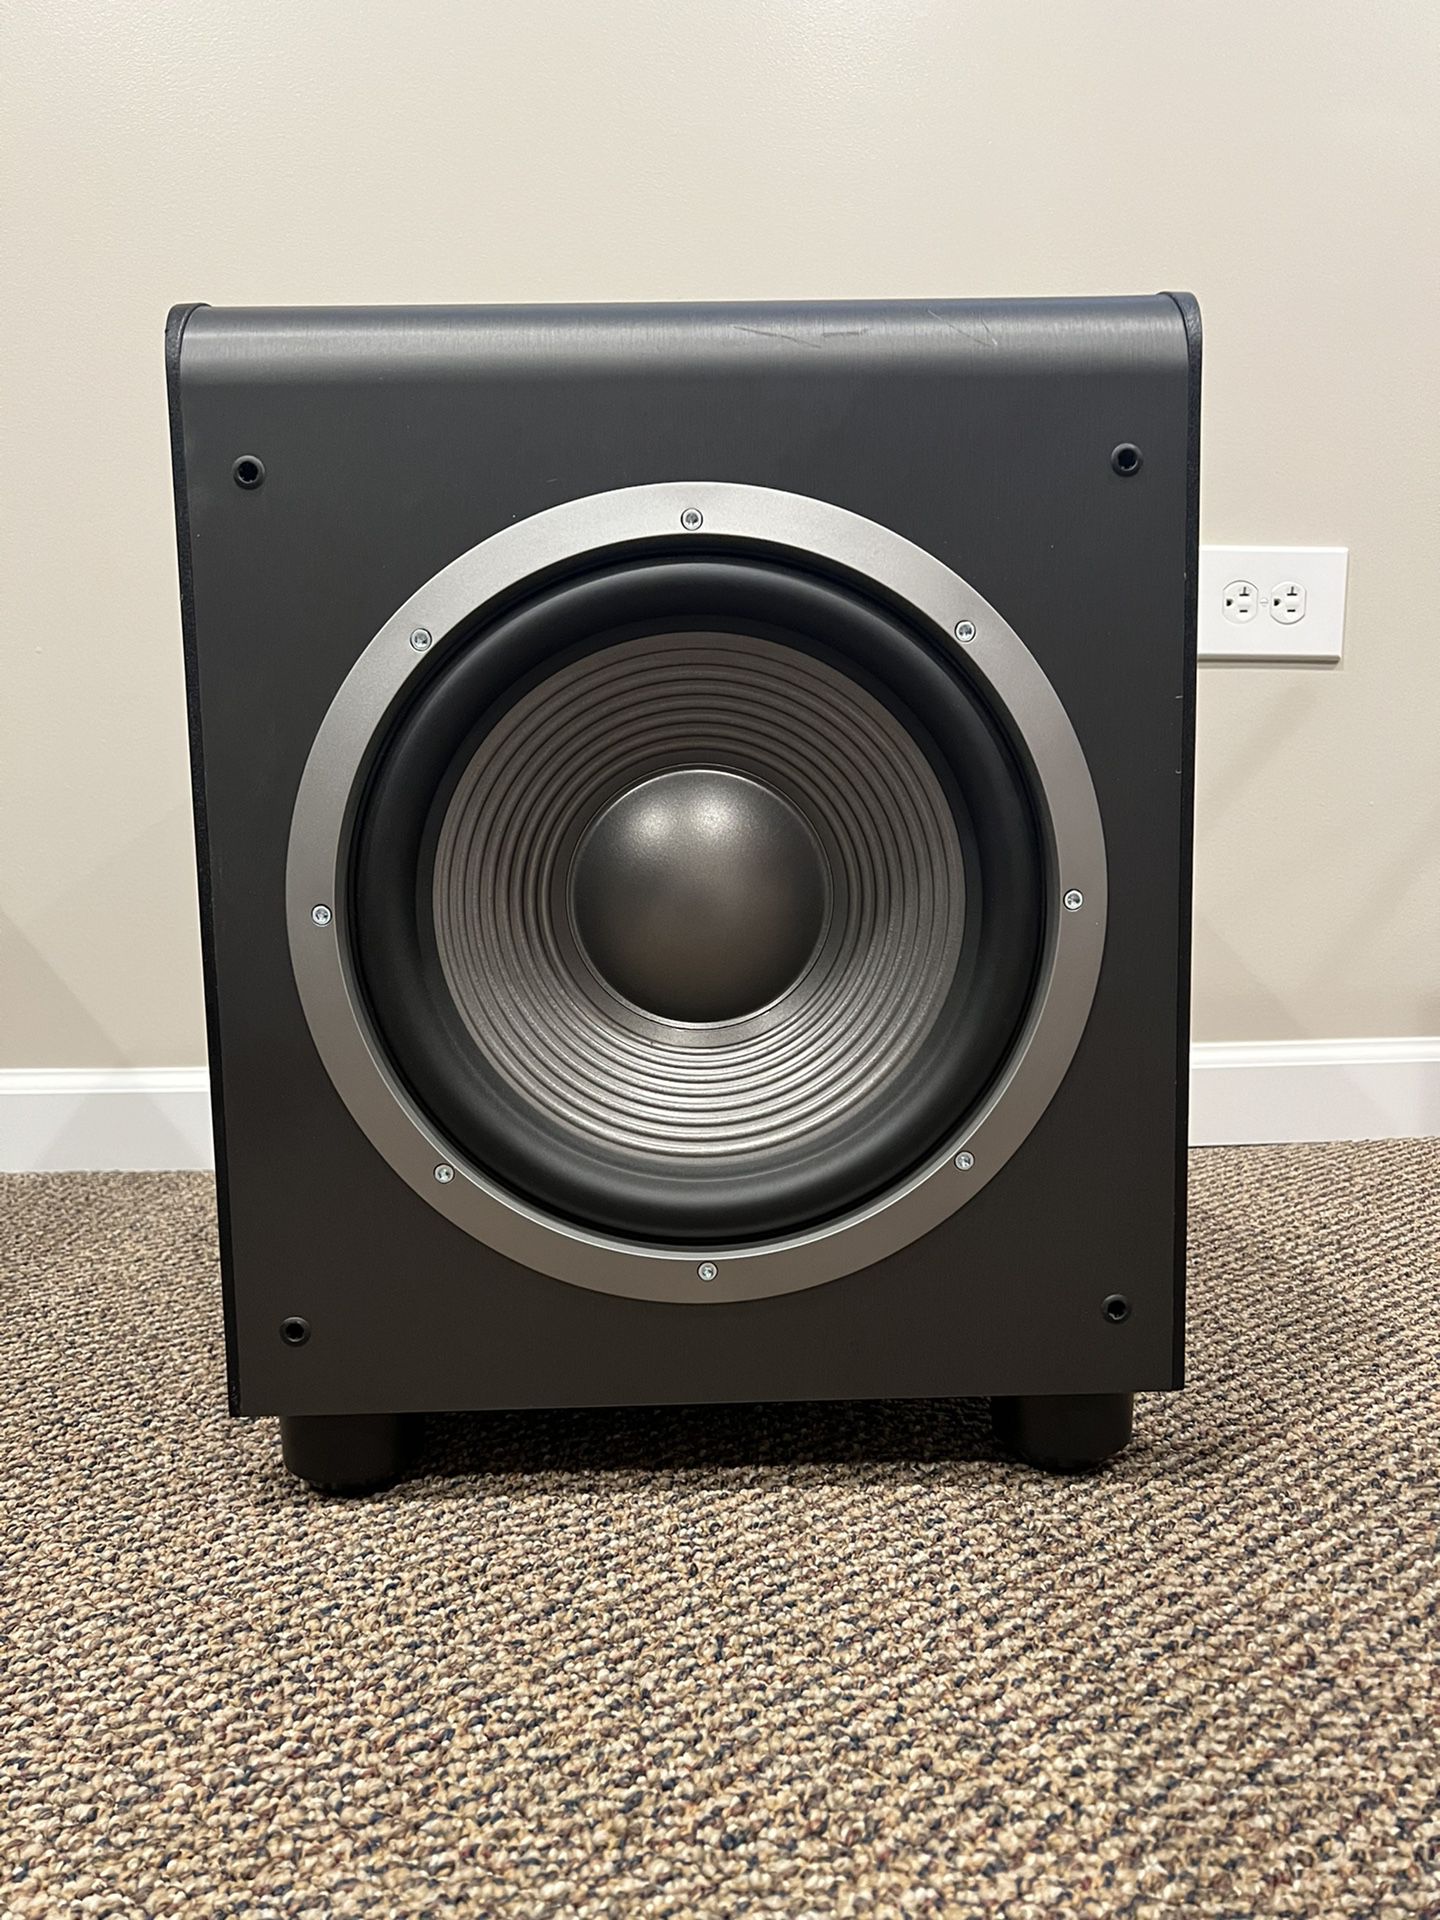 ES250P 12” Subwoofer for Sale in IL - OfferUp